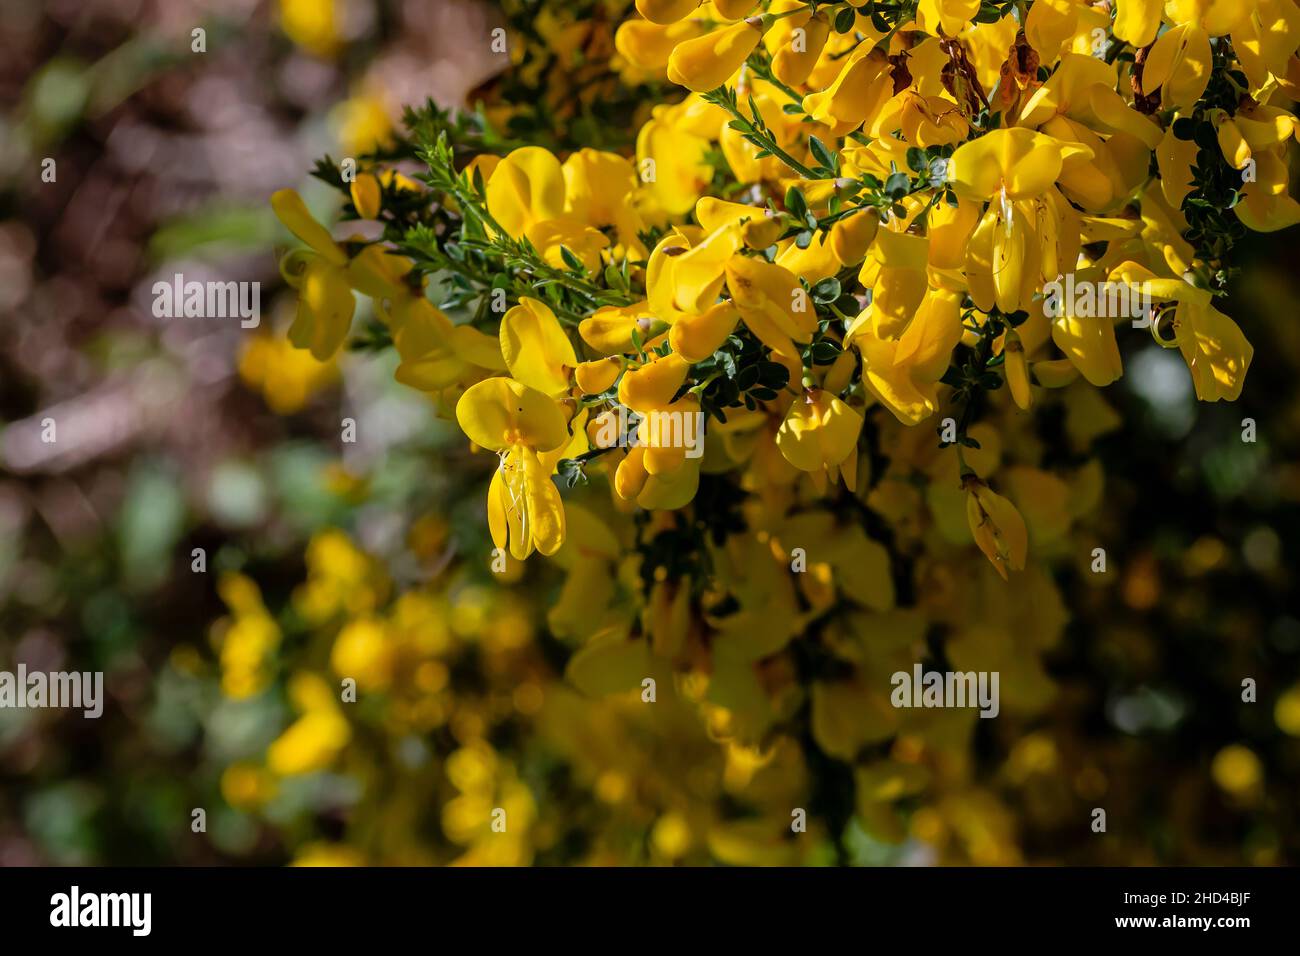 Cytisus scoparius or Scotch broom yellow flowers blooming in spring Stock Photo